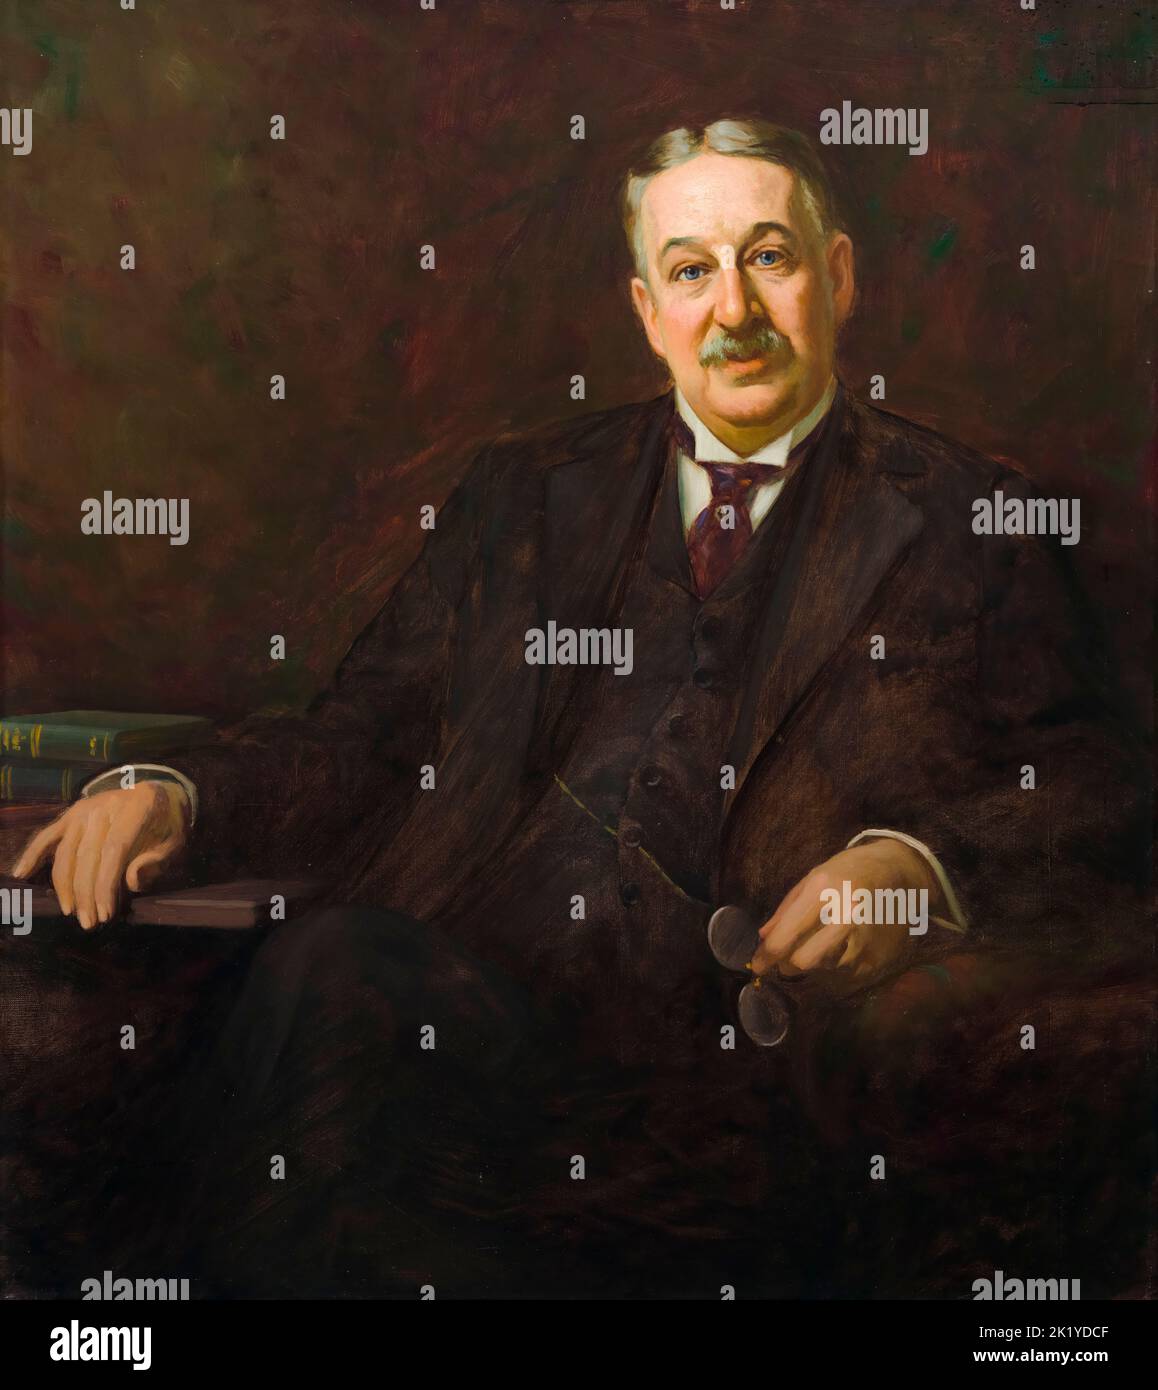 King Camp Gillette (1855-1932), American businessman, inventor of the disposable safety razor, portrait painting in oil on canvas by Jean Mannheim, 1911 Stock Photo